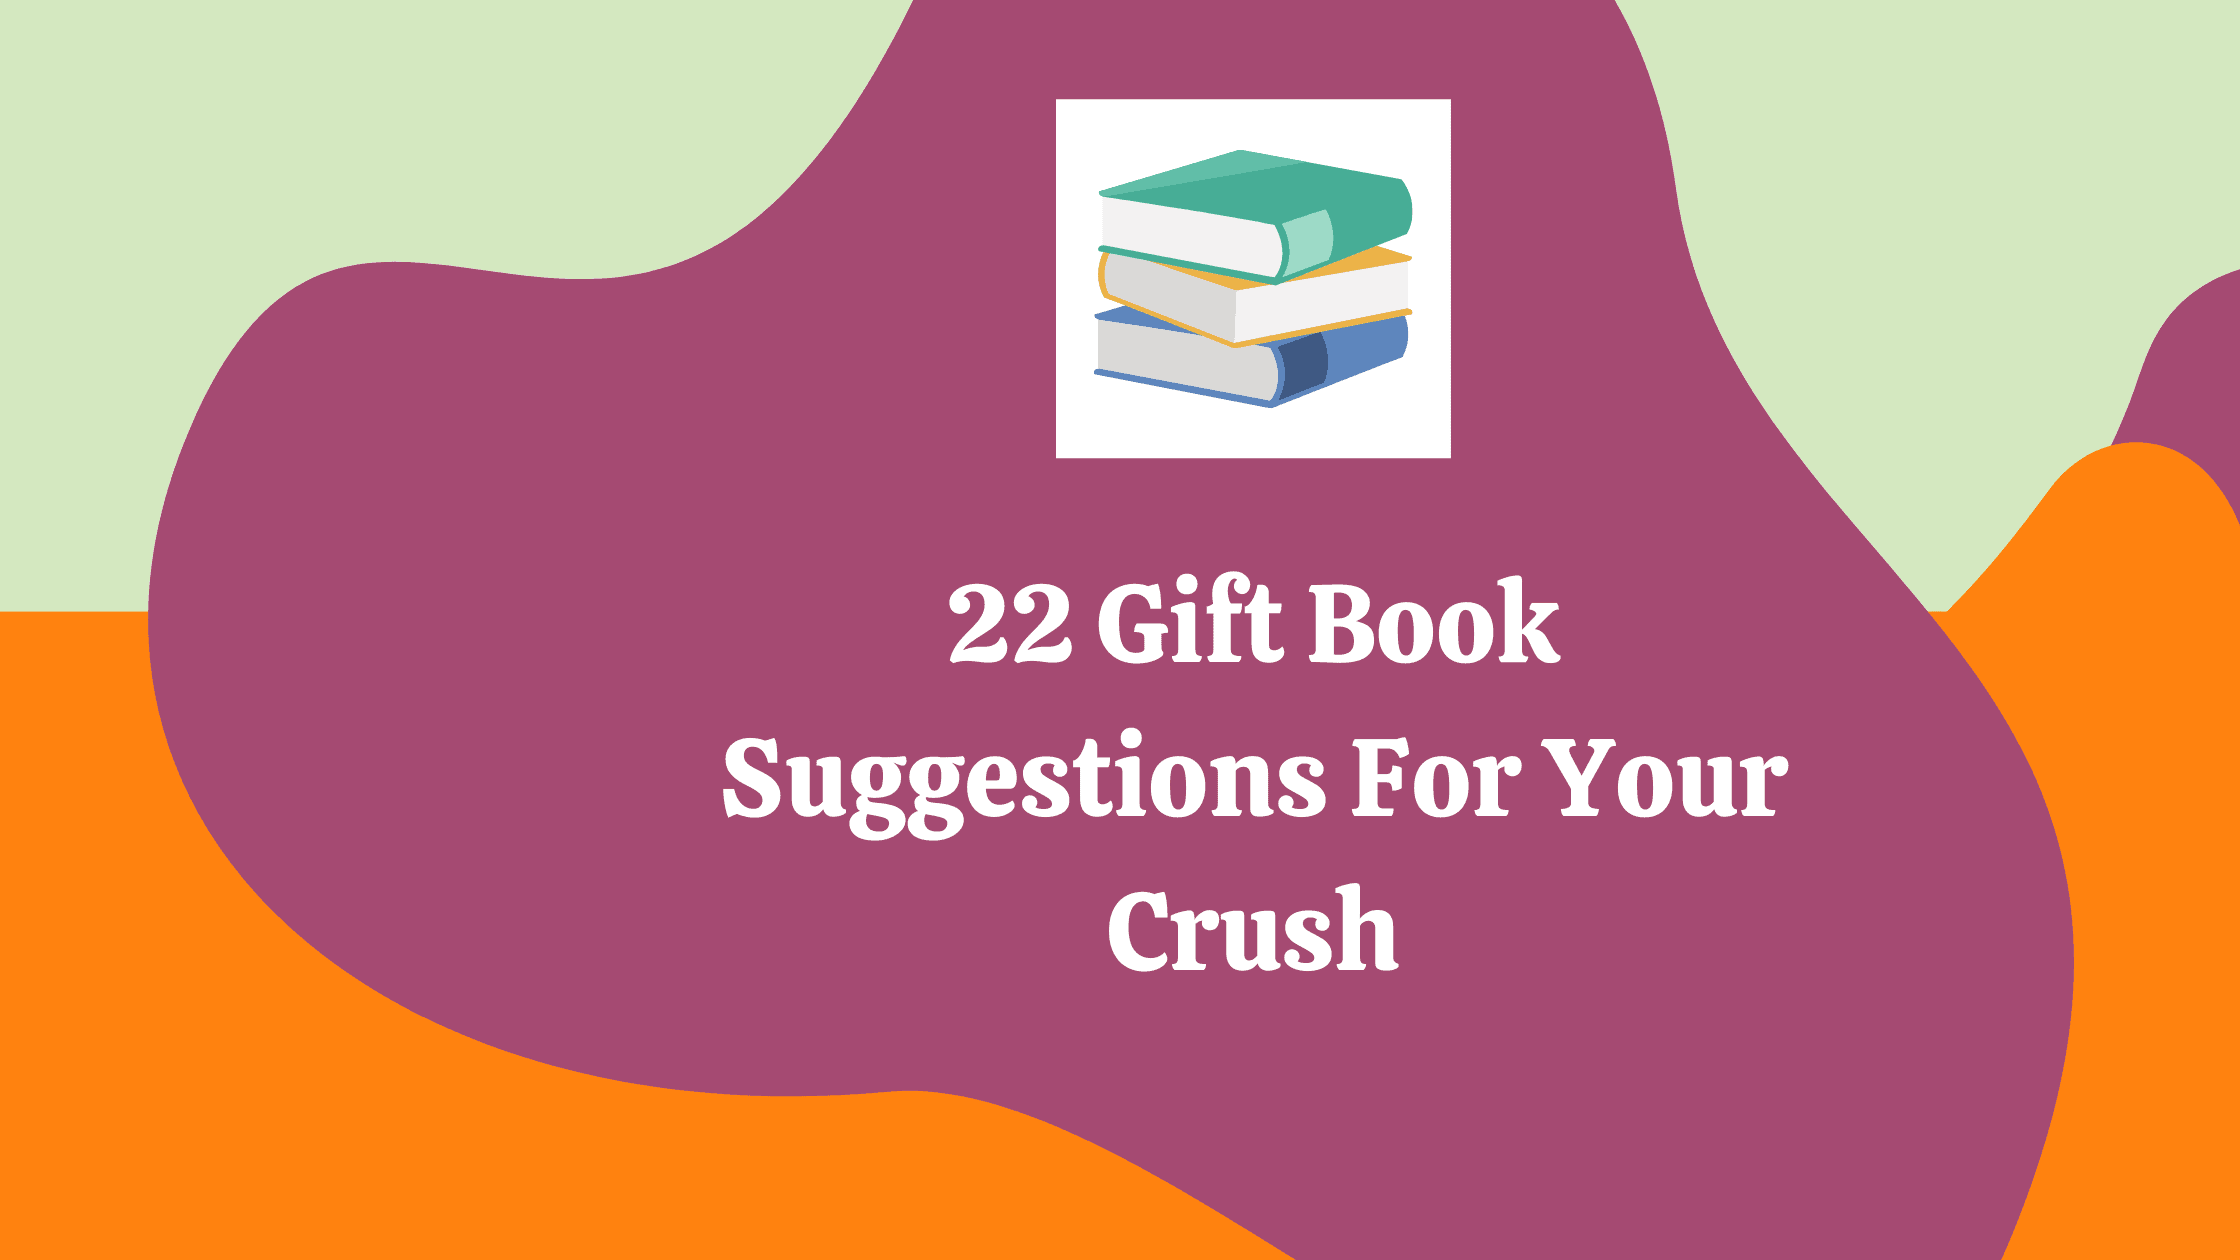 What is the best thing to gift a crush (girl) on her birthday? - Quora